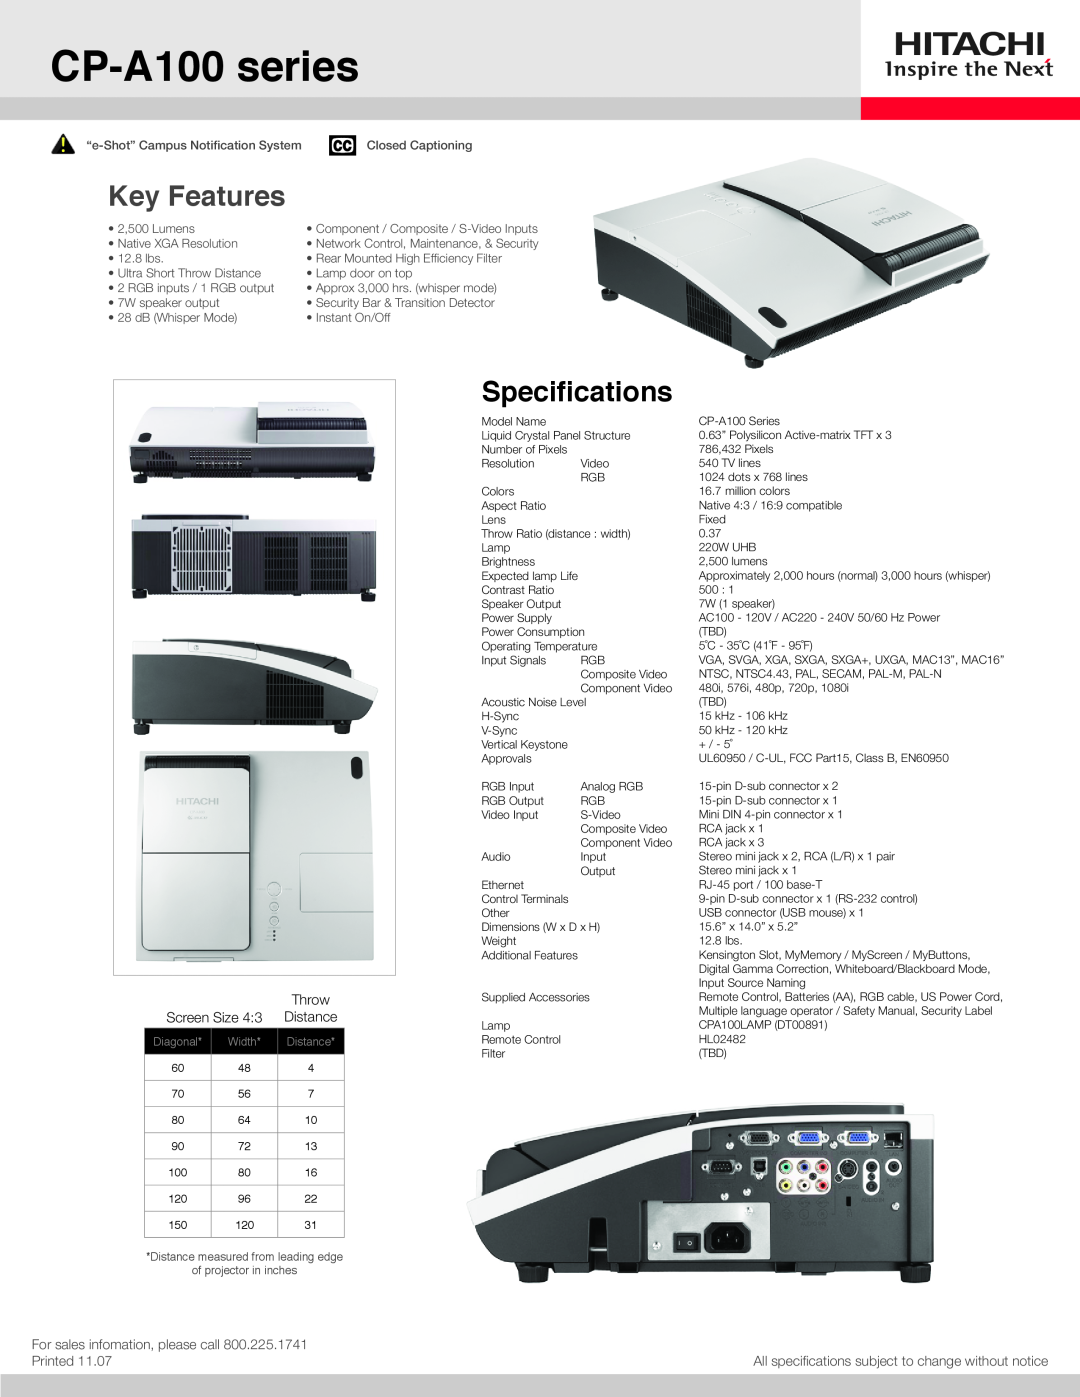 Hitachi specifications CP-A100 series, Key Features, Specifications, Screen Size, Throw, Distance, Printed, Diagonal 